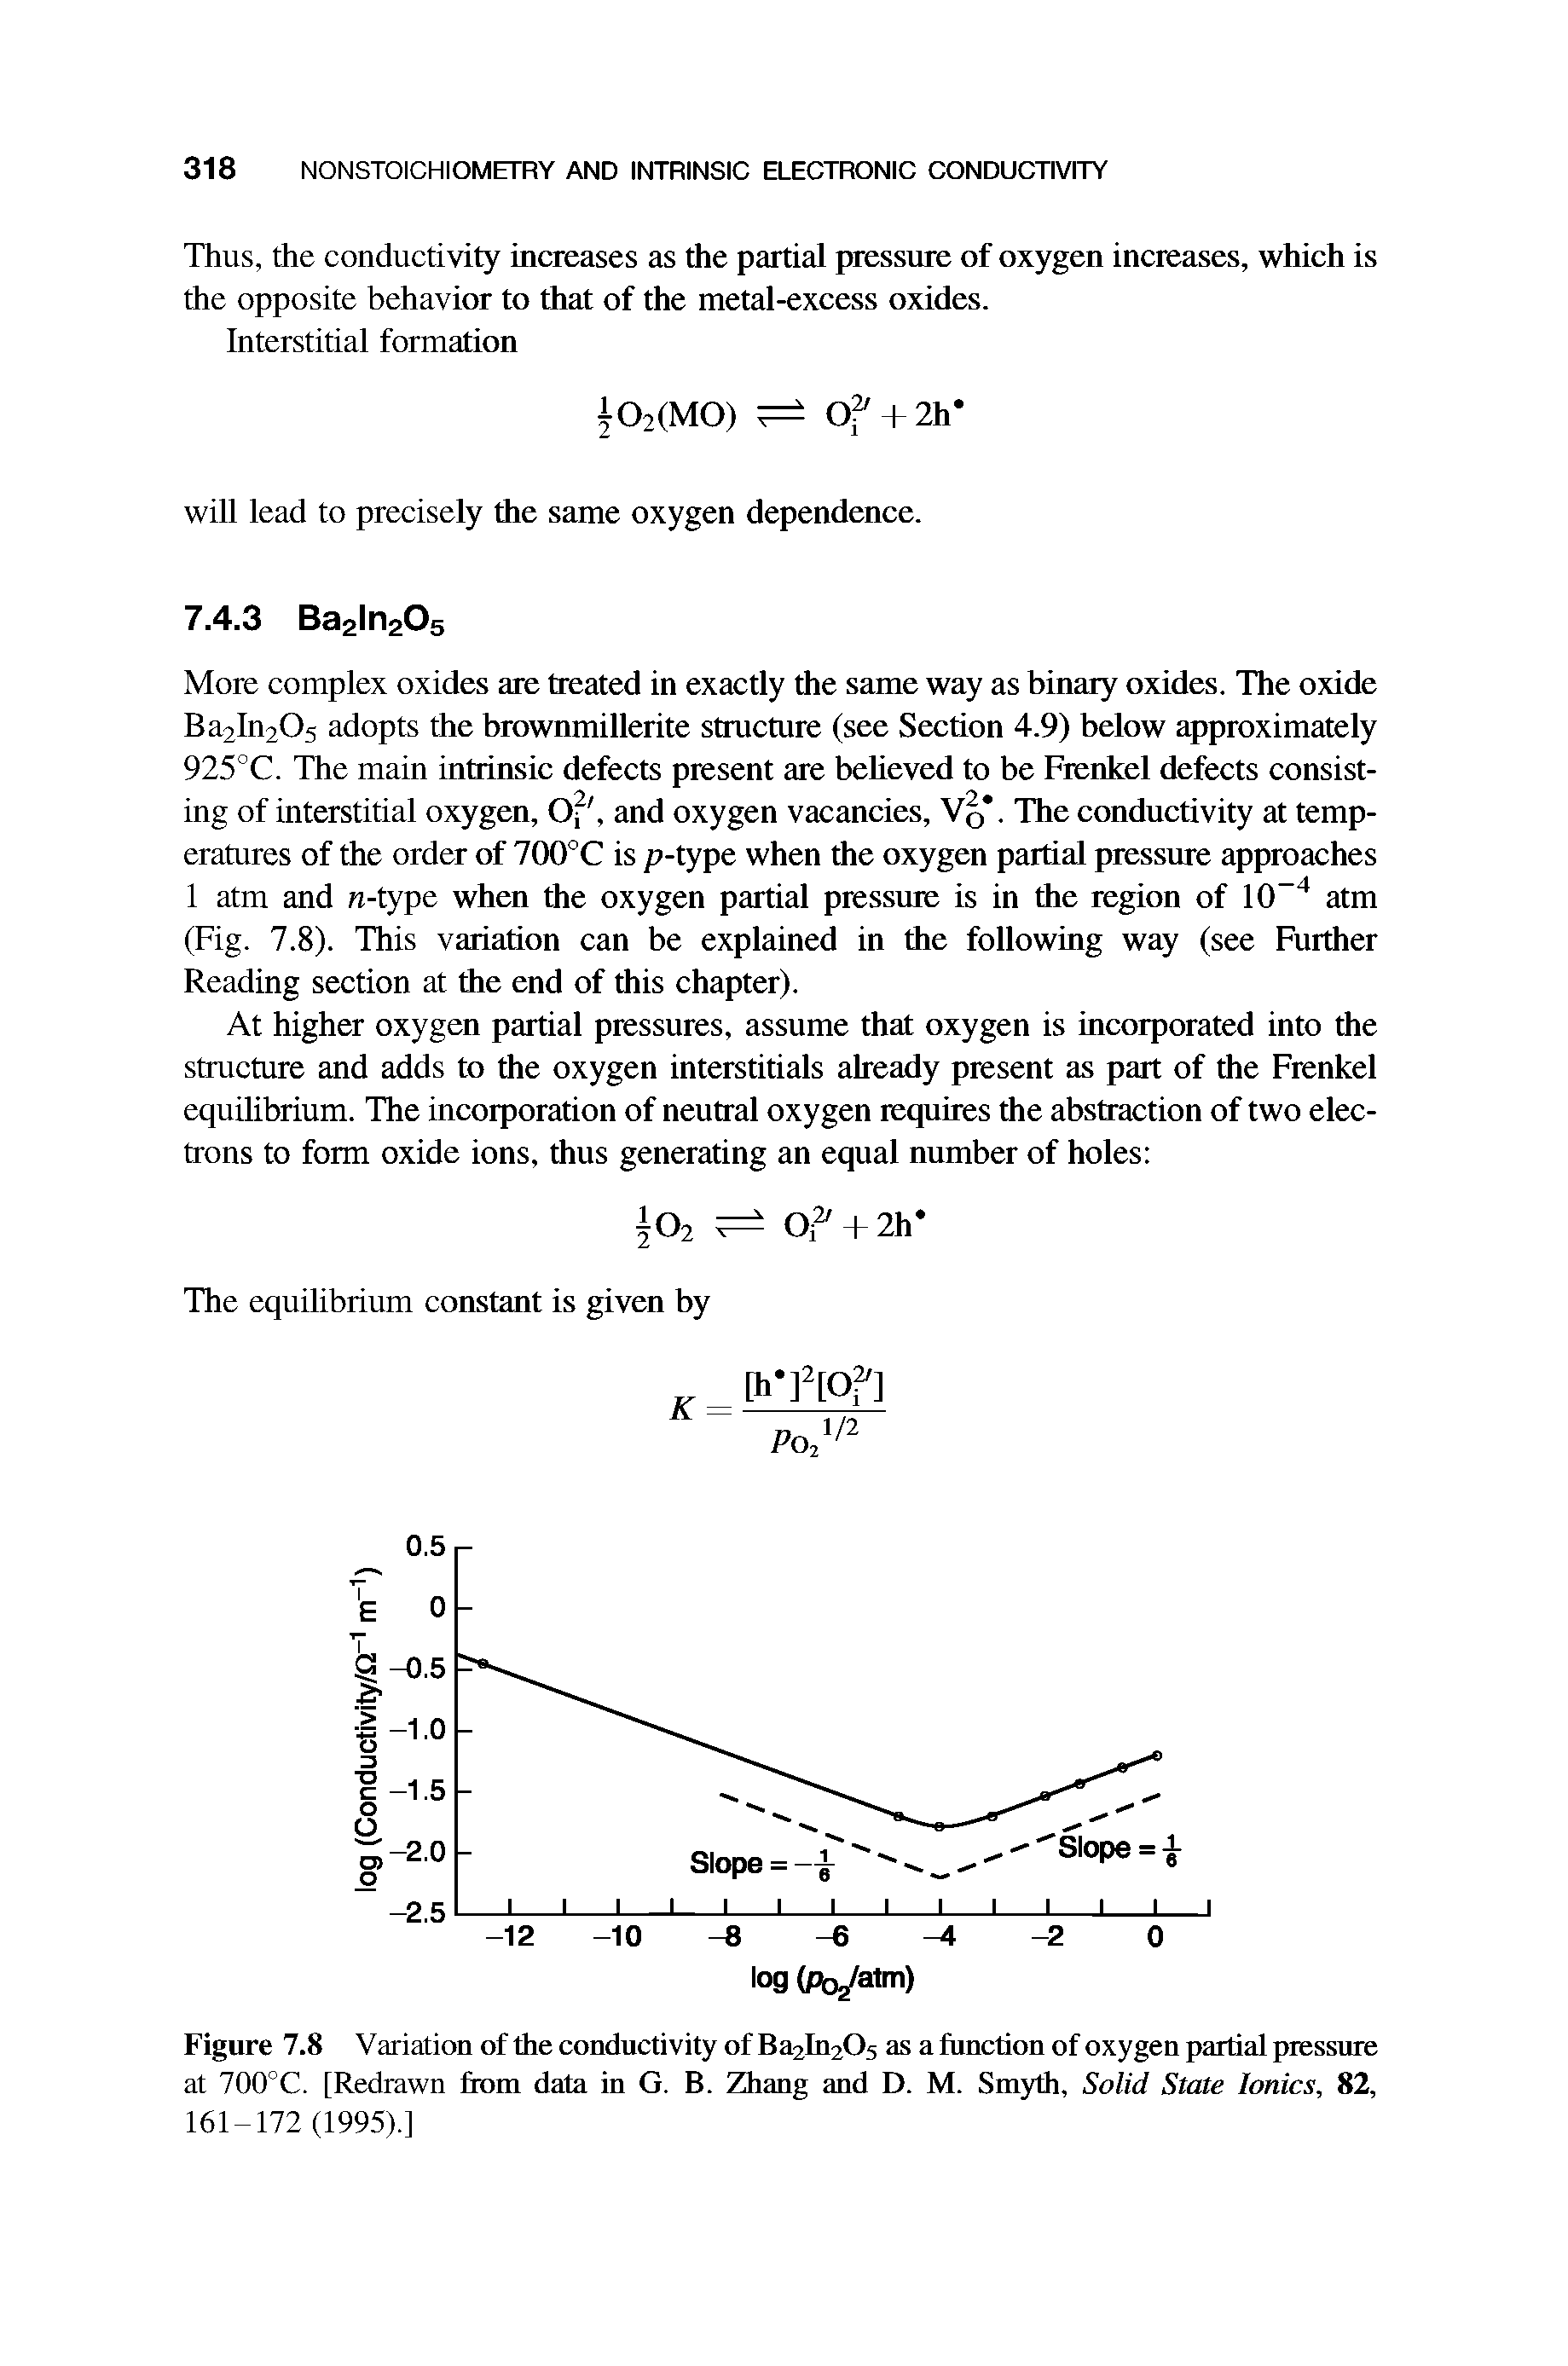 Figure 7.8 Variation of the conductivity of Ba2In205 as a function of oxygen partial pressure at 700°C. [Redrawn from data in G. B. Zhang and D. M. Smyth, Solid State Ionics, 82, 161-172 (1995).]...